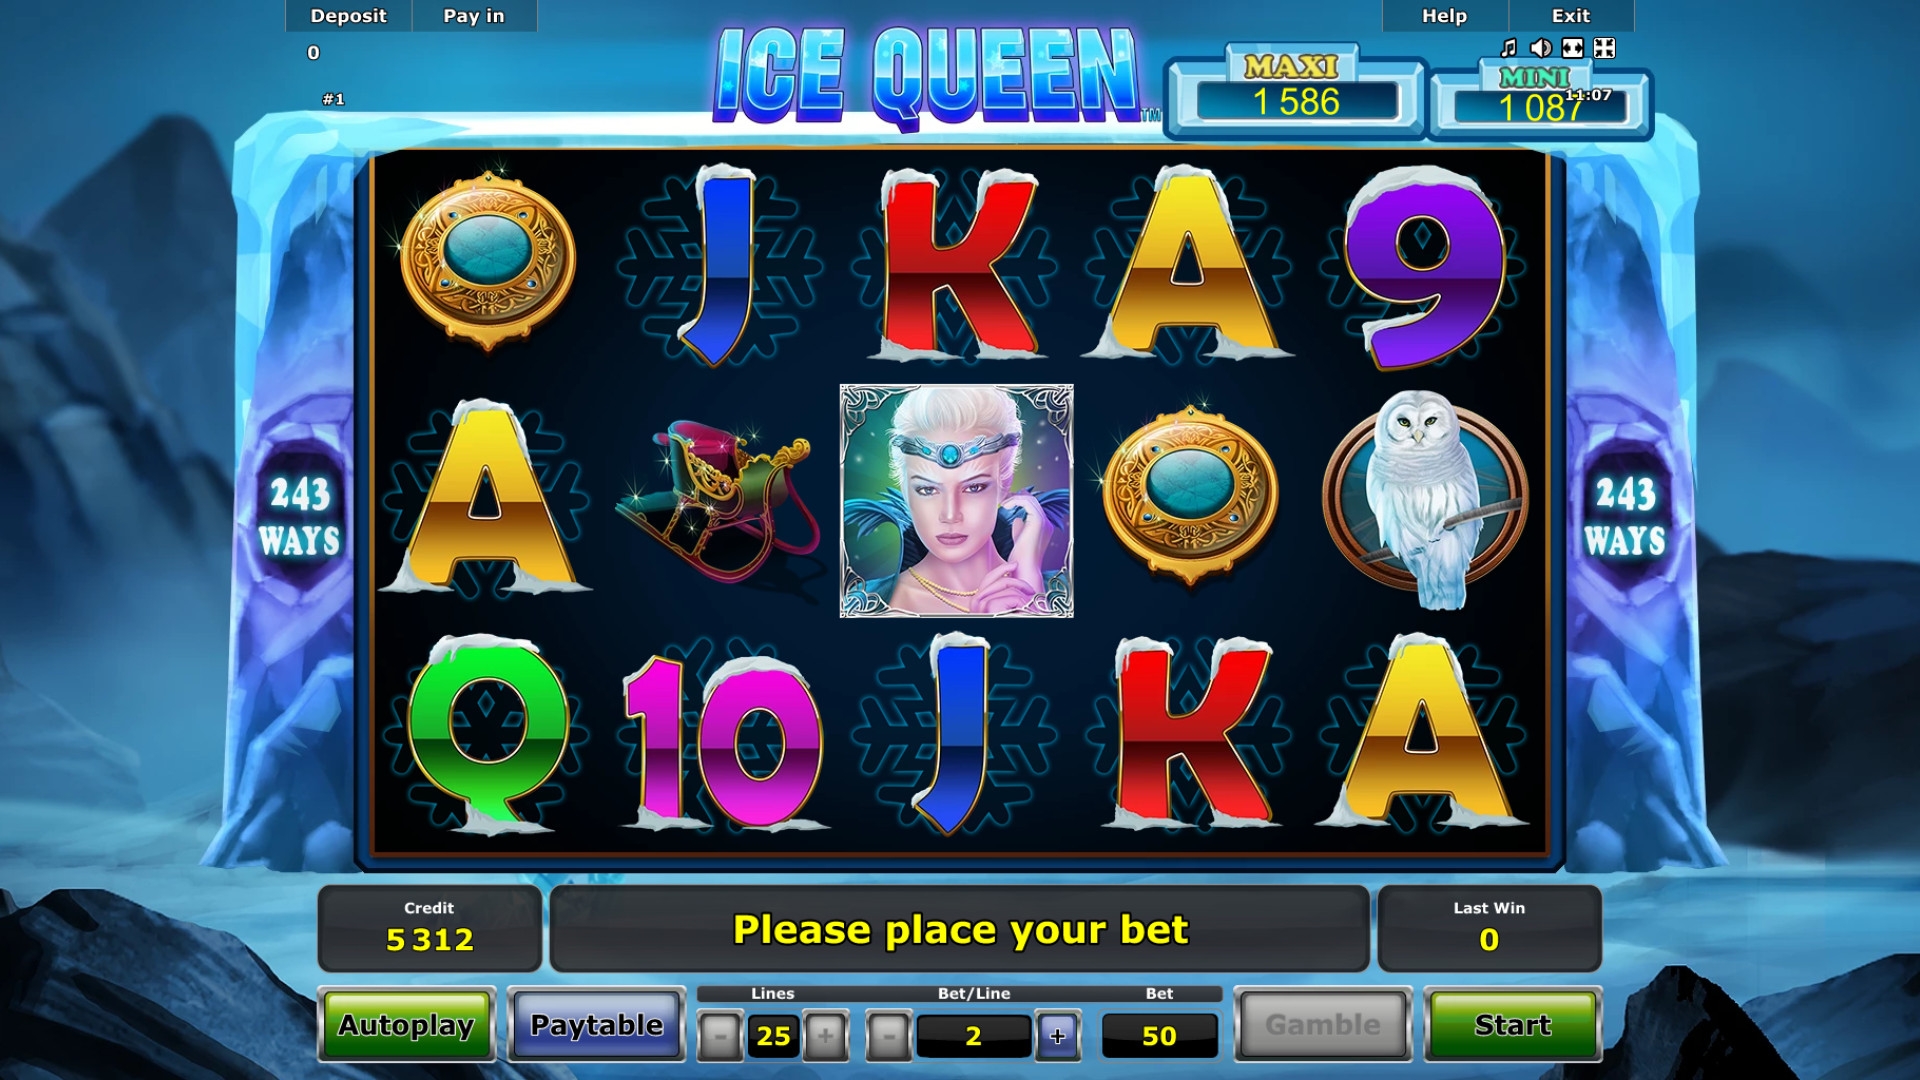 Ice Queen (Ice Queen) from category Slots